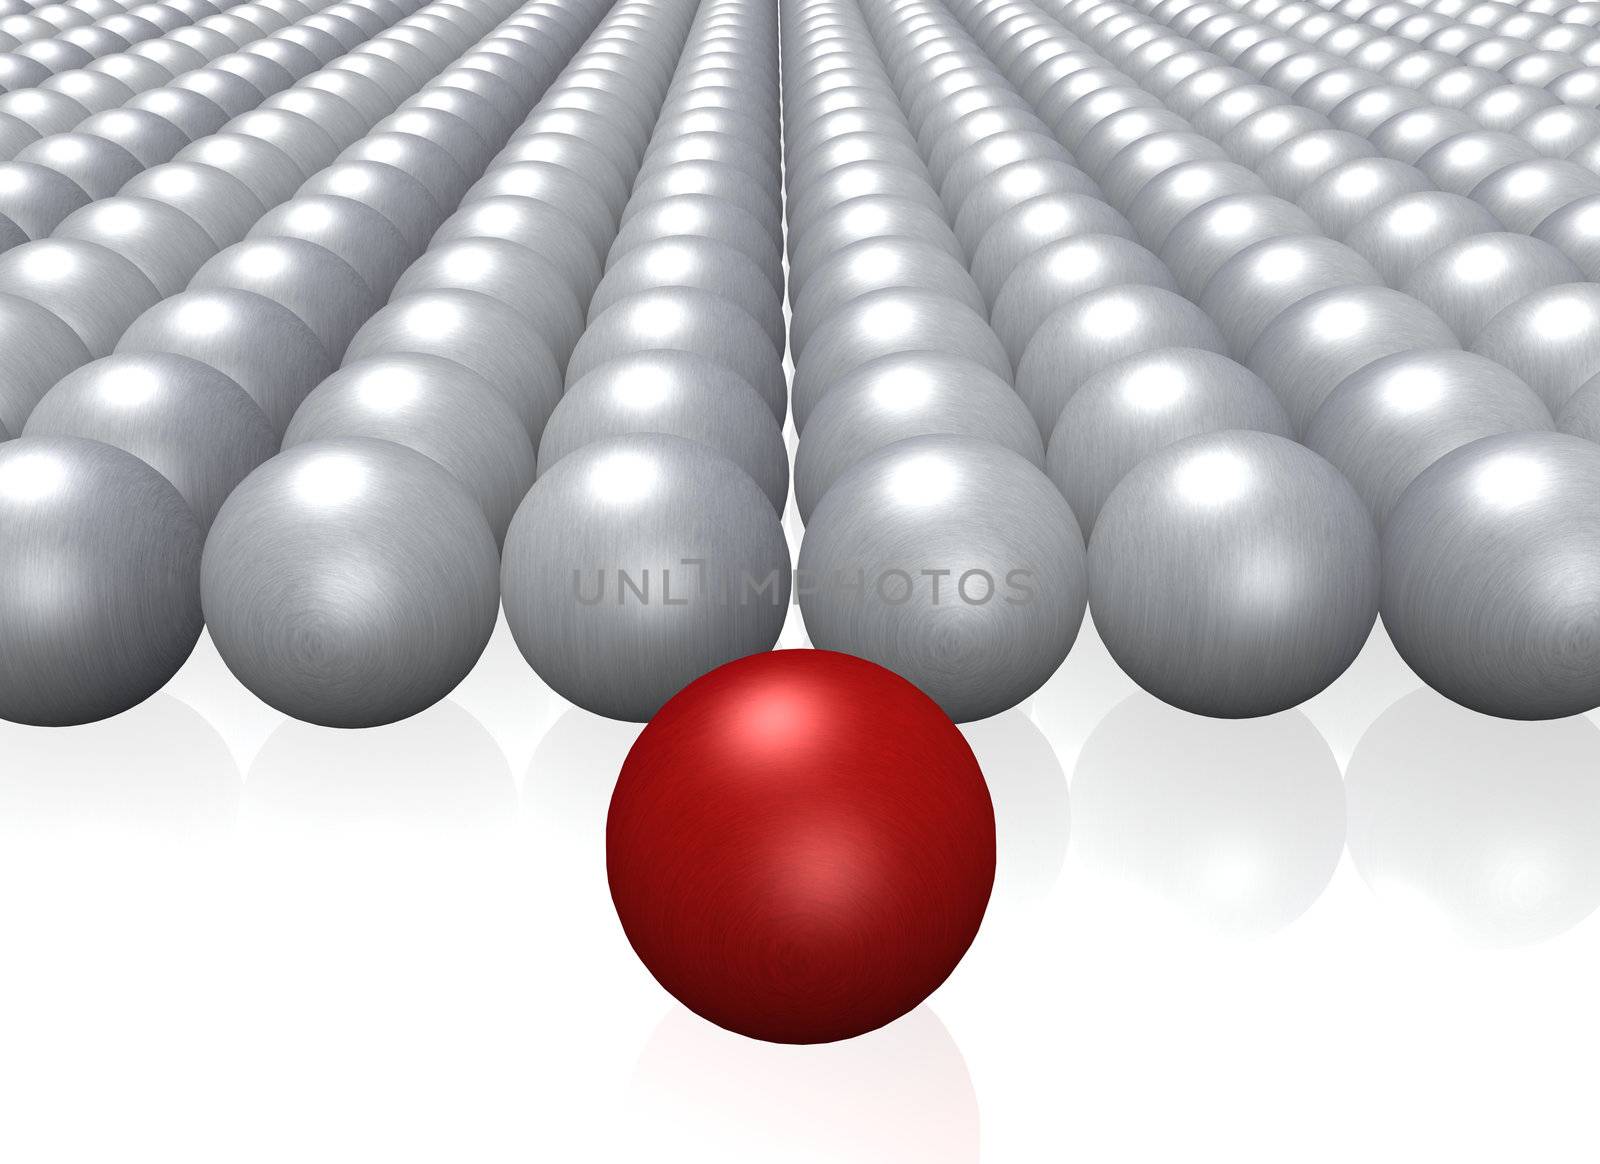 A single red ball among a crowd of grey balls.